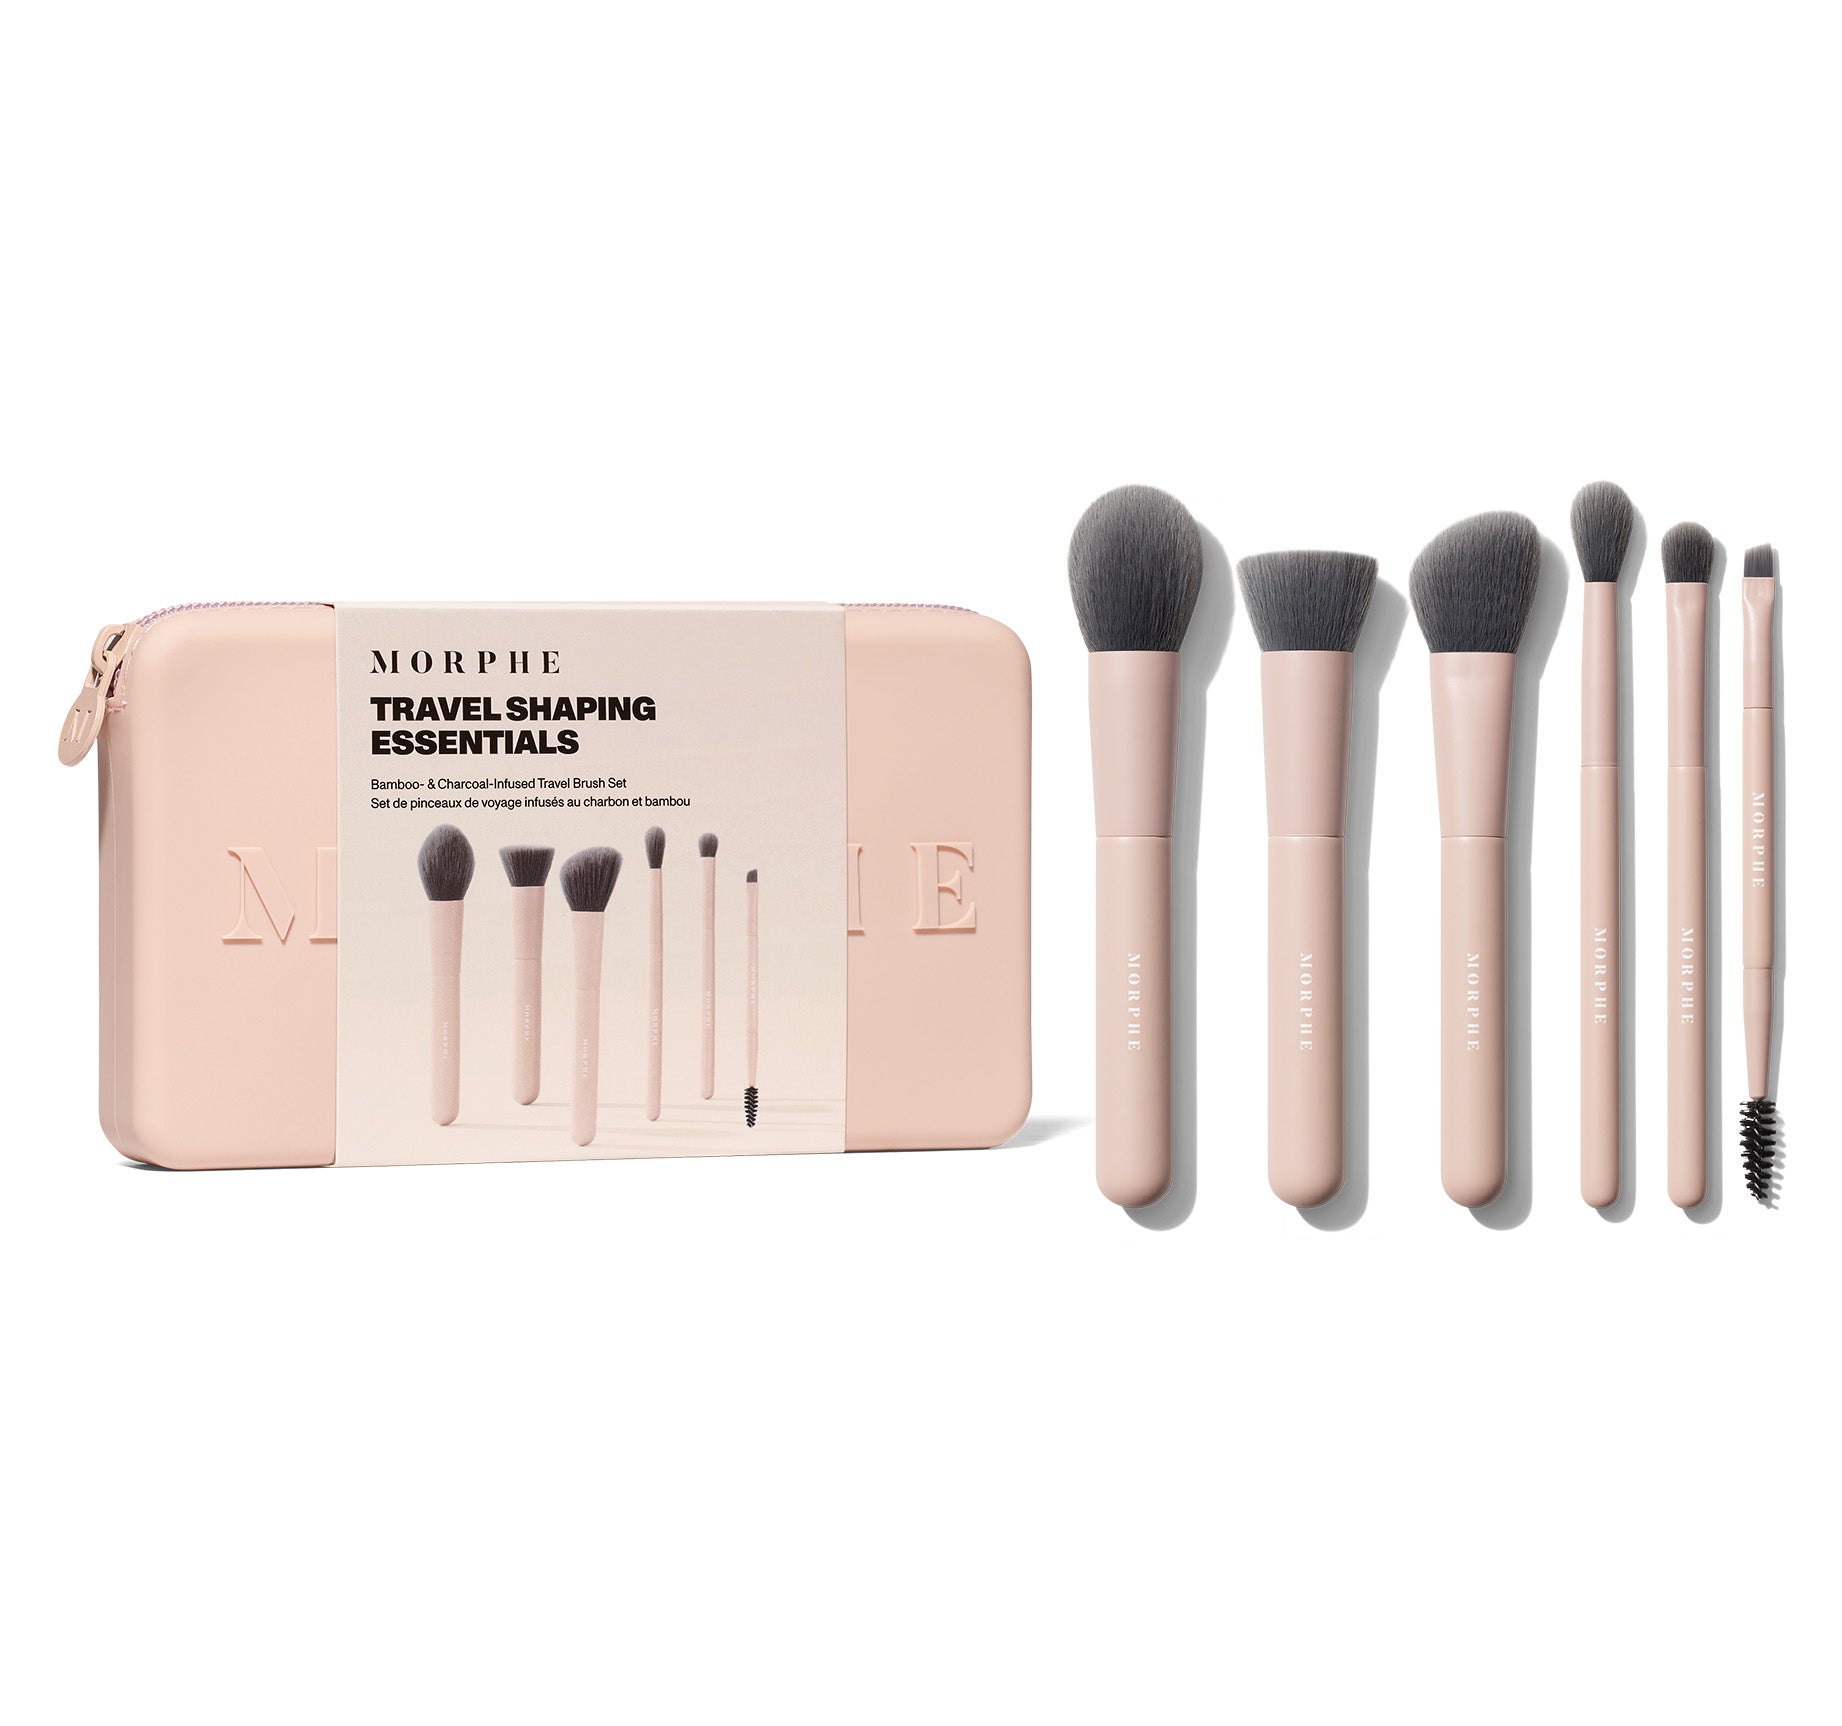 Travel Shaping Essentials Bamboo & Charcoal Infused Travel Brush Set - Image 7